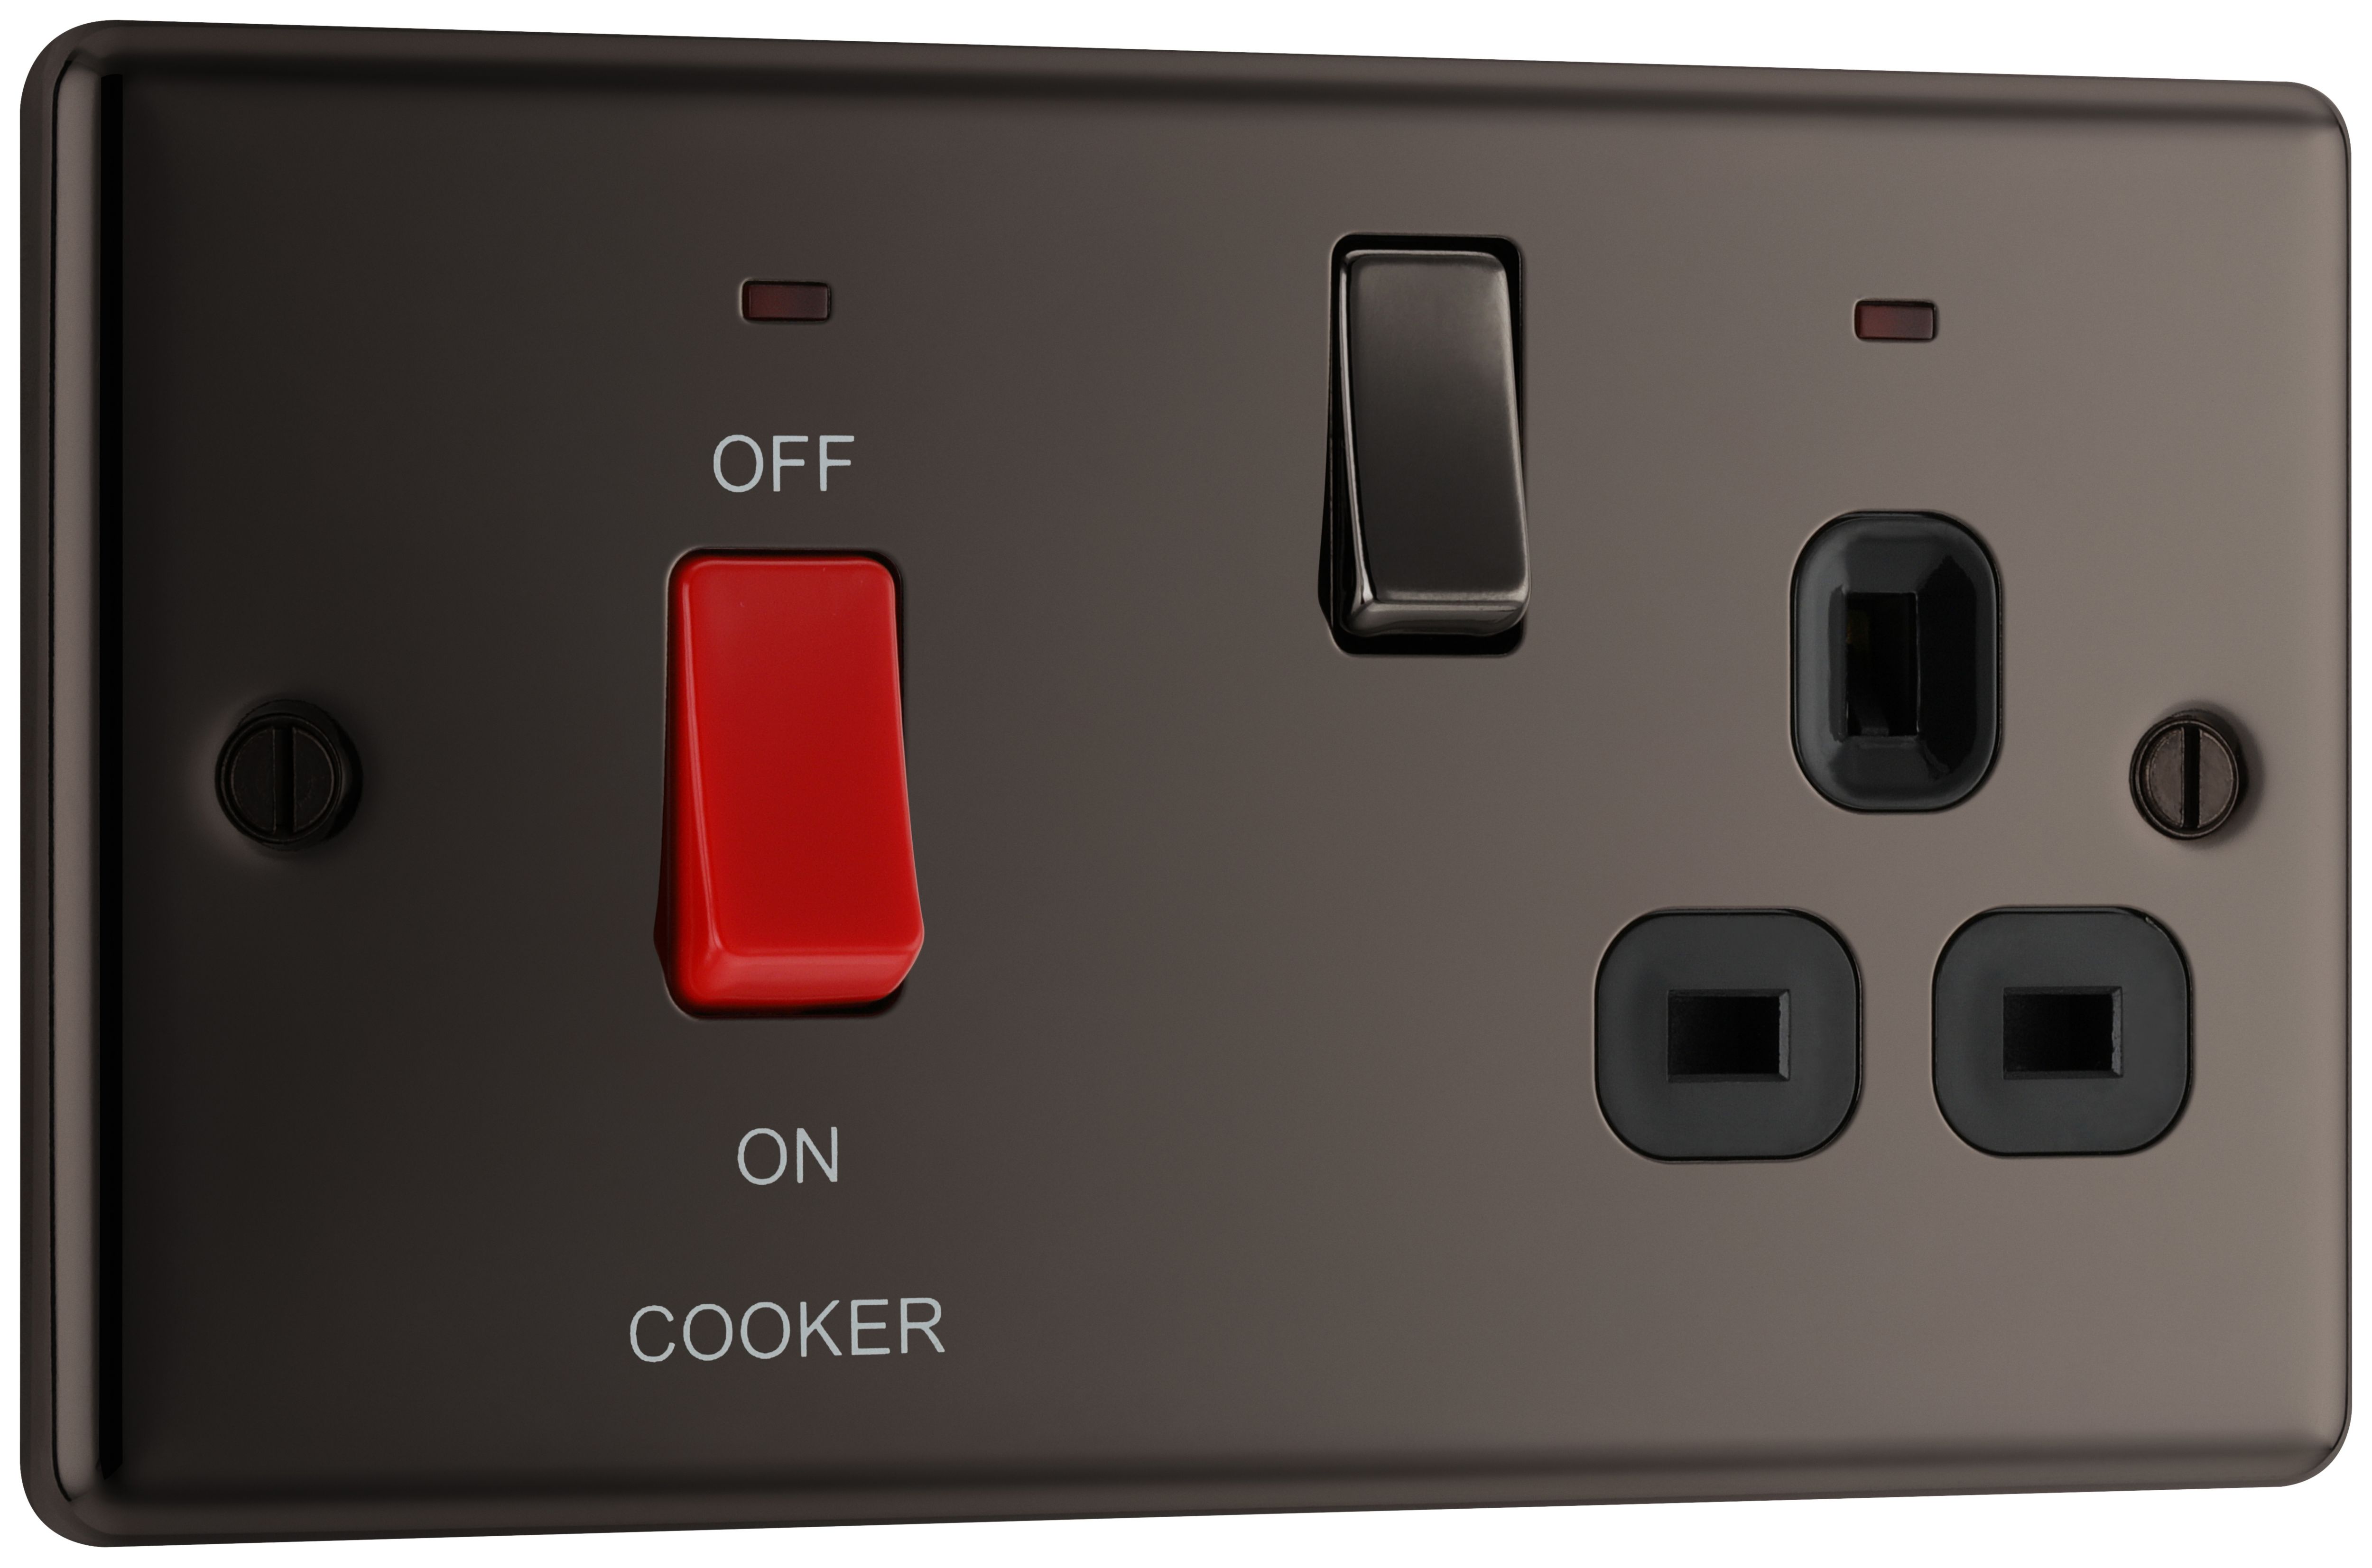 BG 45 Amp Screwed Raised Plate Cooker Control Unit with Switched 13 Amp Power Socket Includes Power Indicators - Black Nickel